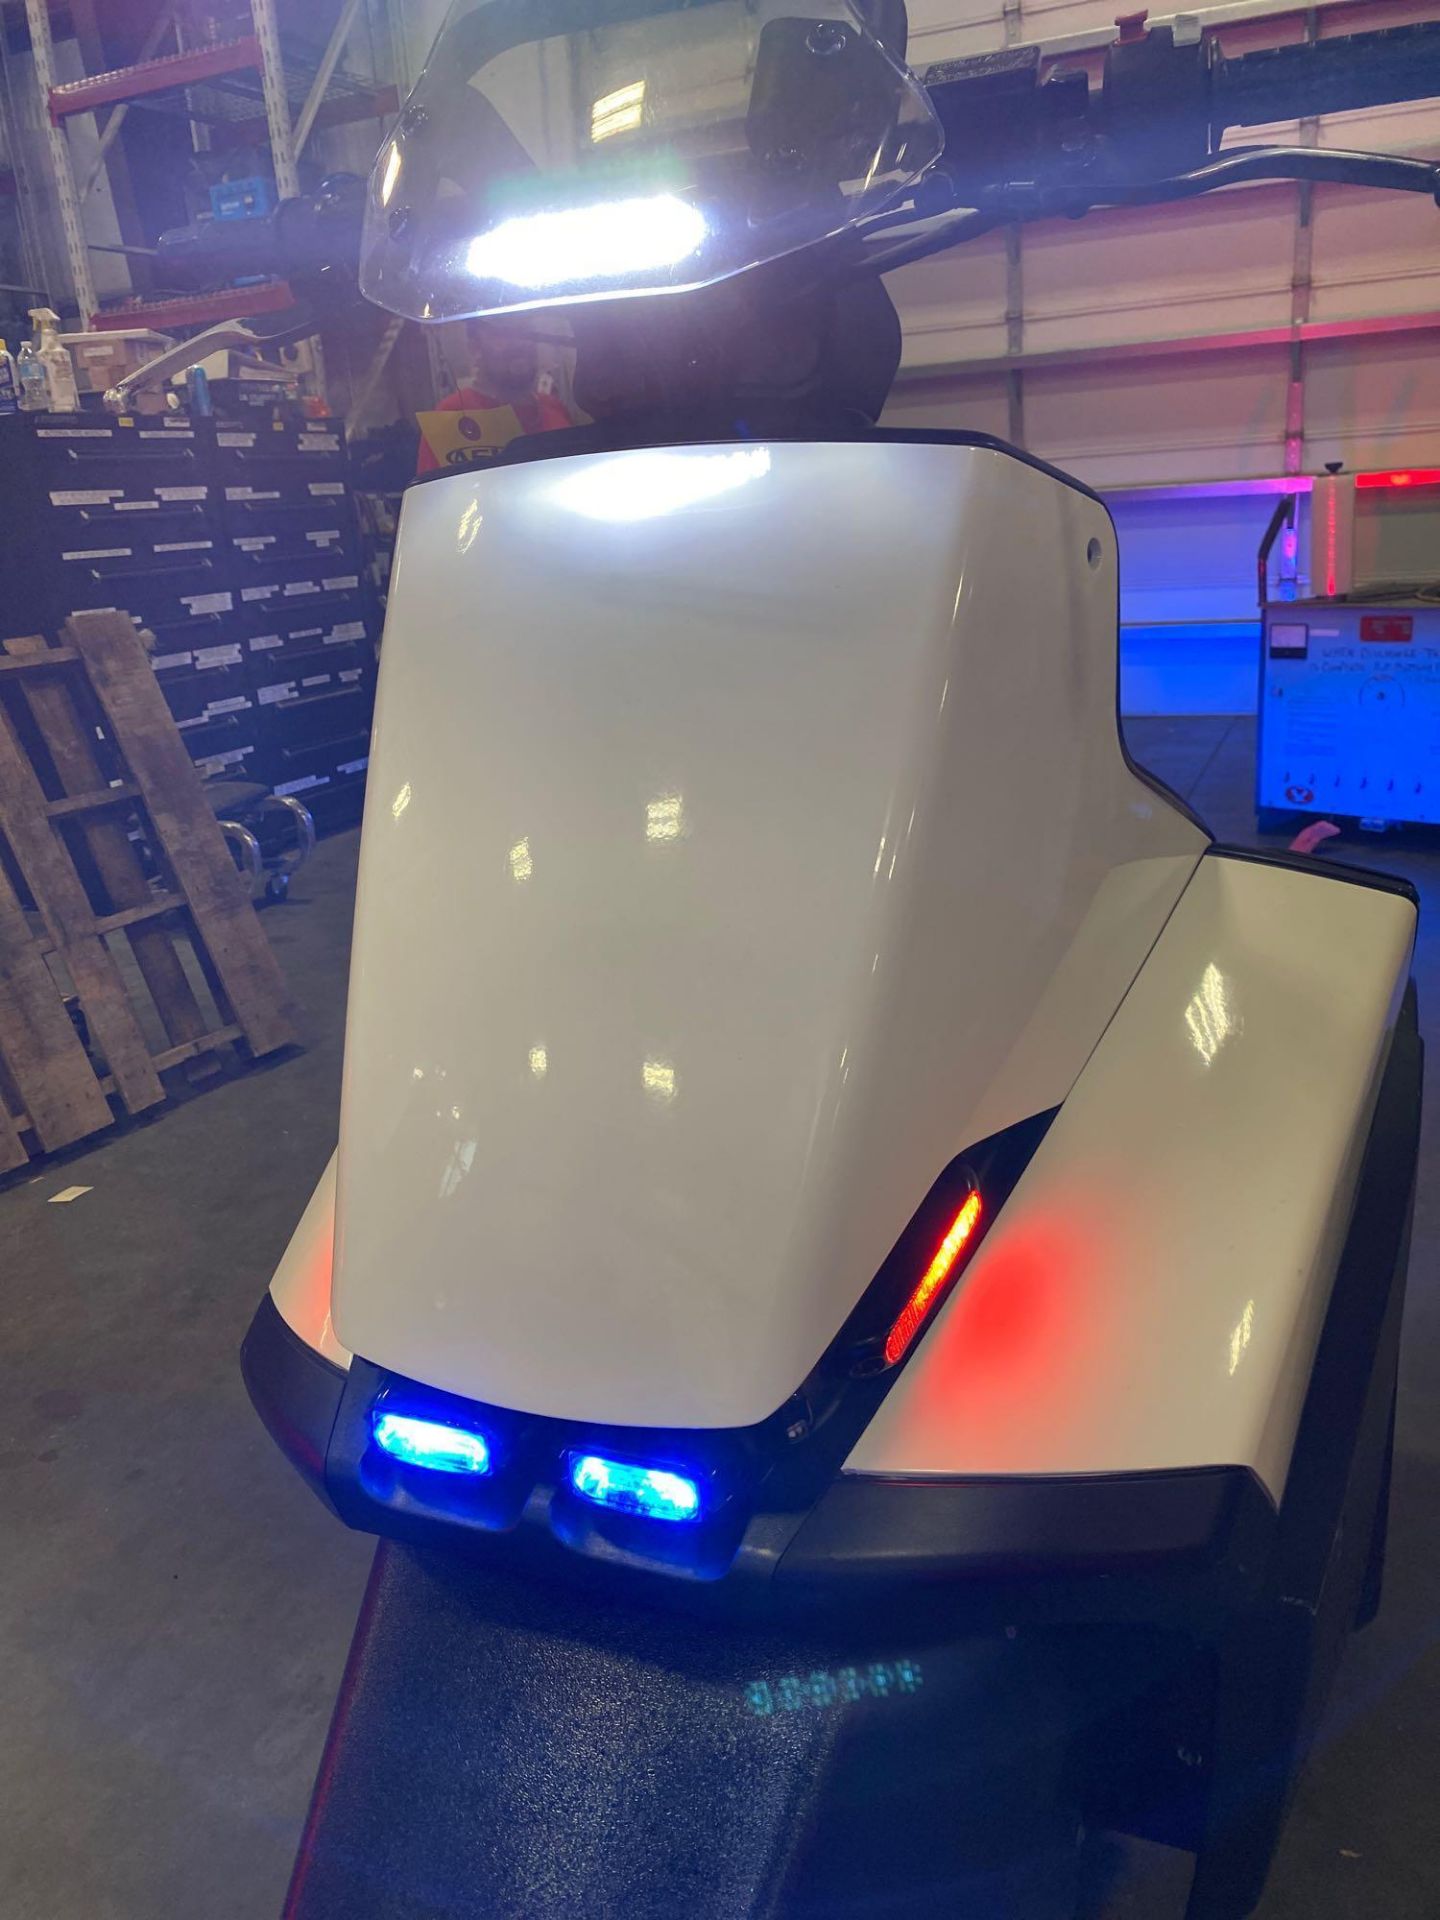 3-WHEEL SEGWAY WITH SIREN, RED WHITE & BLUE LIGHTS, 3,501.4 MILES, RUNS AND DRIVES - Image 19 of 22